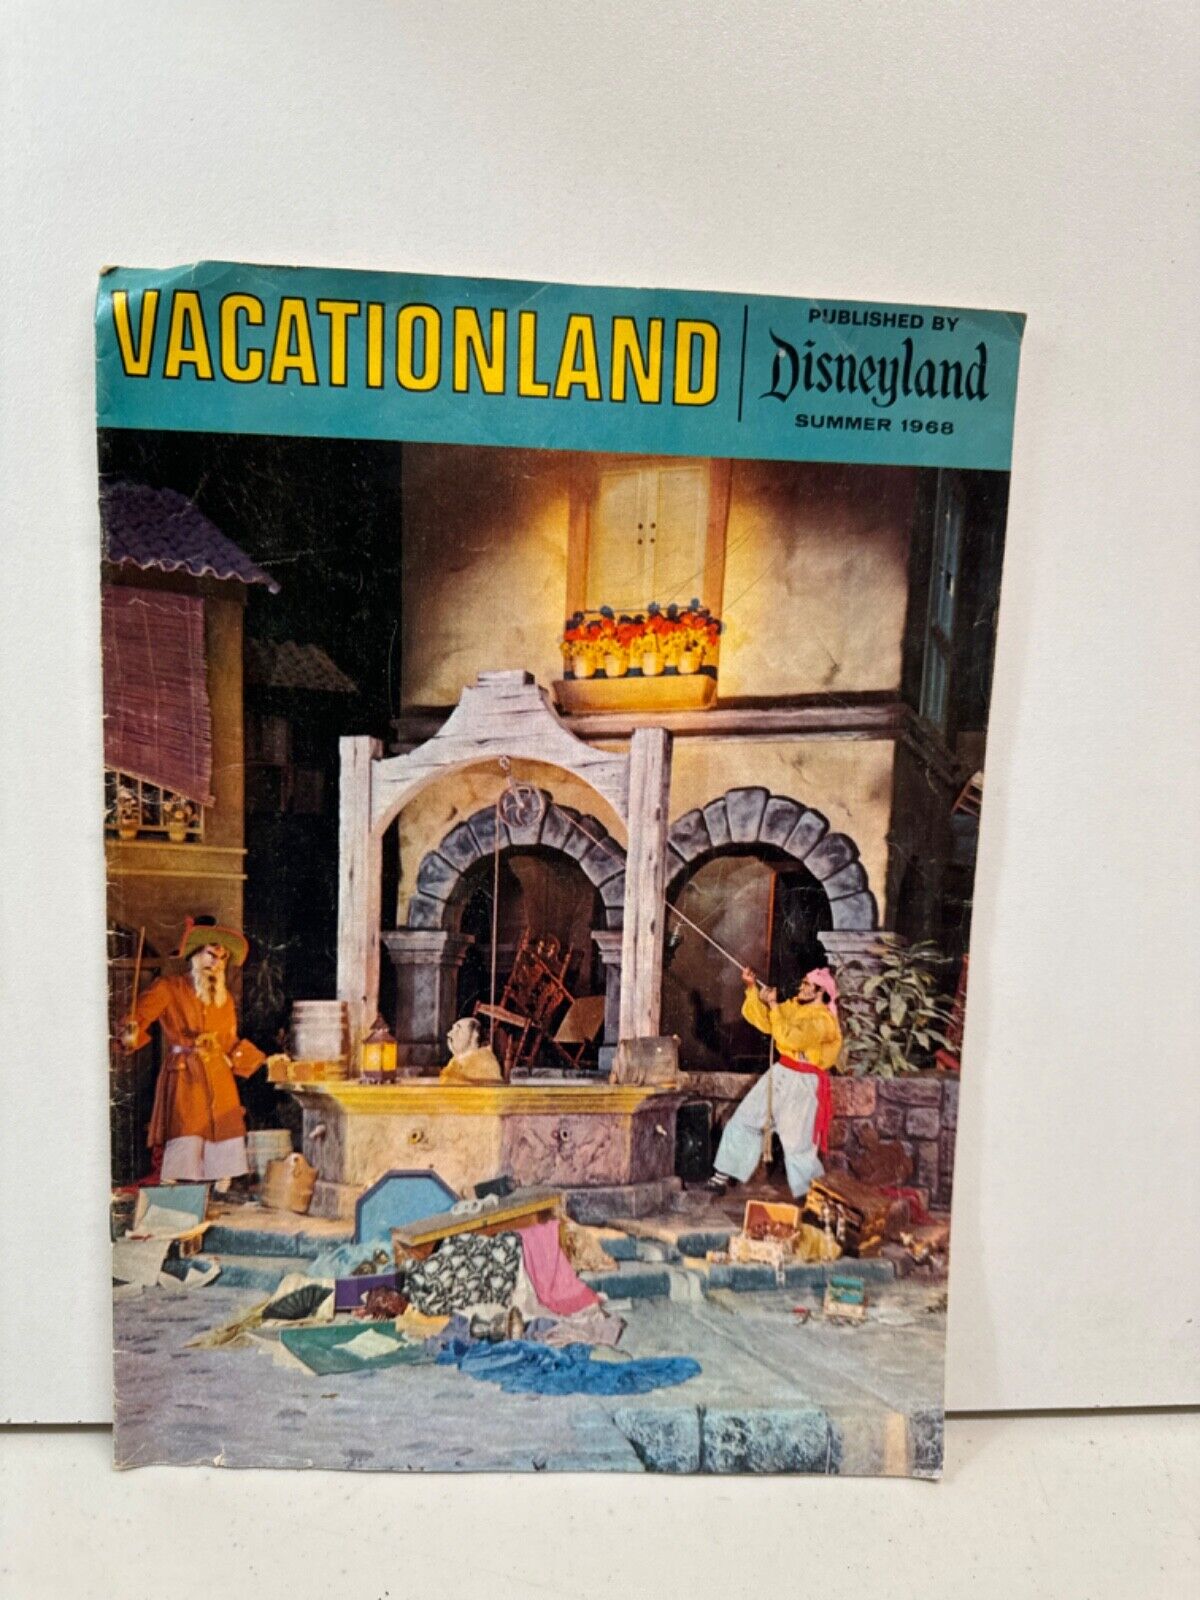 1968 Summer Vacationland published by Disney